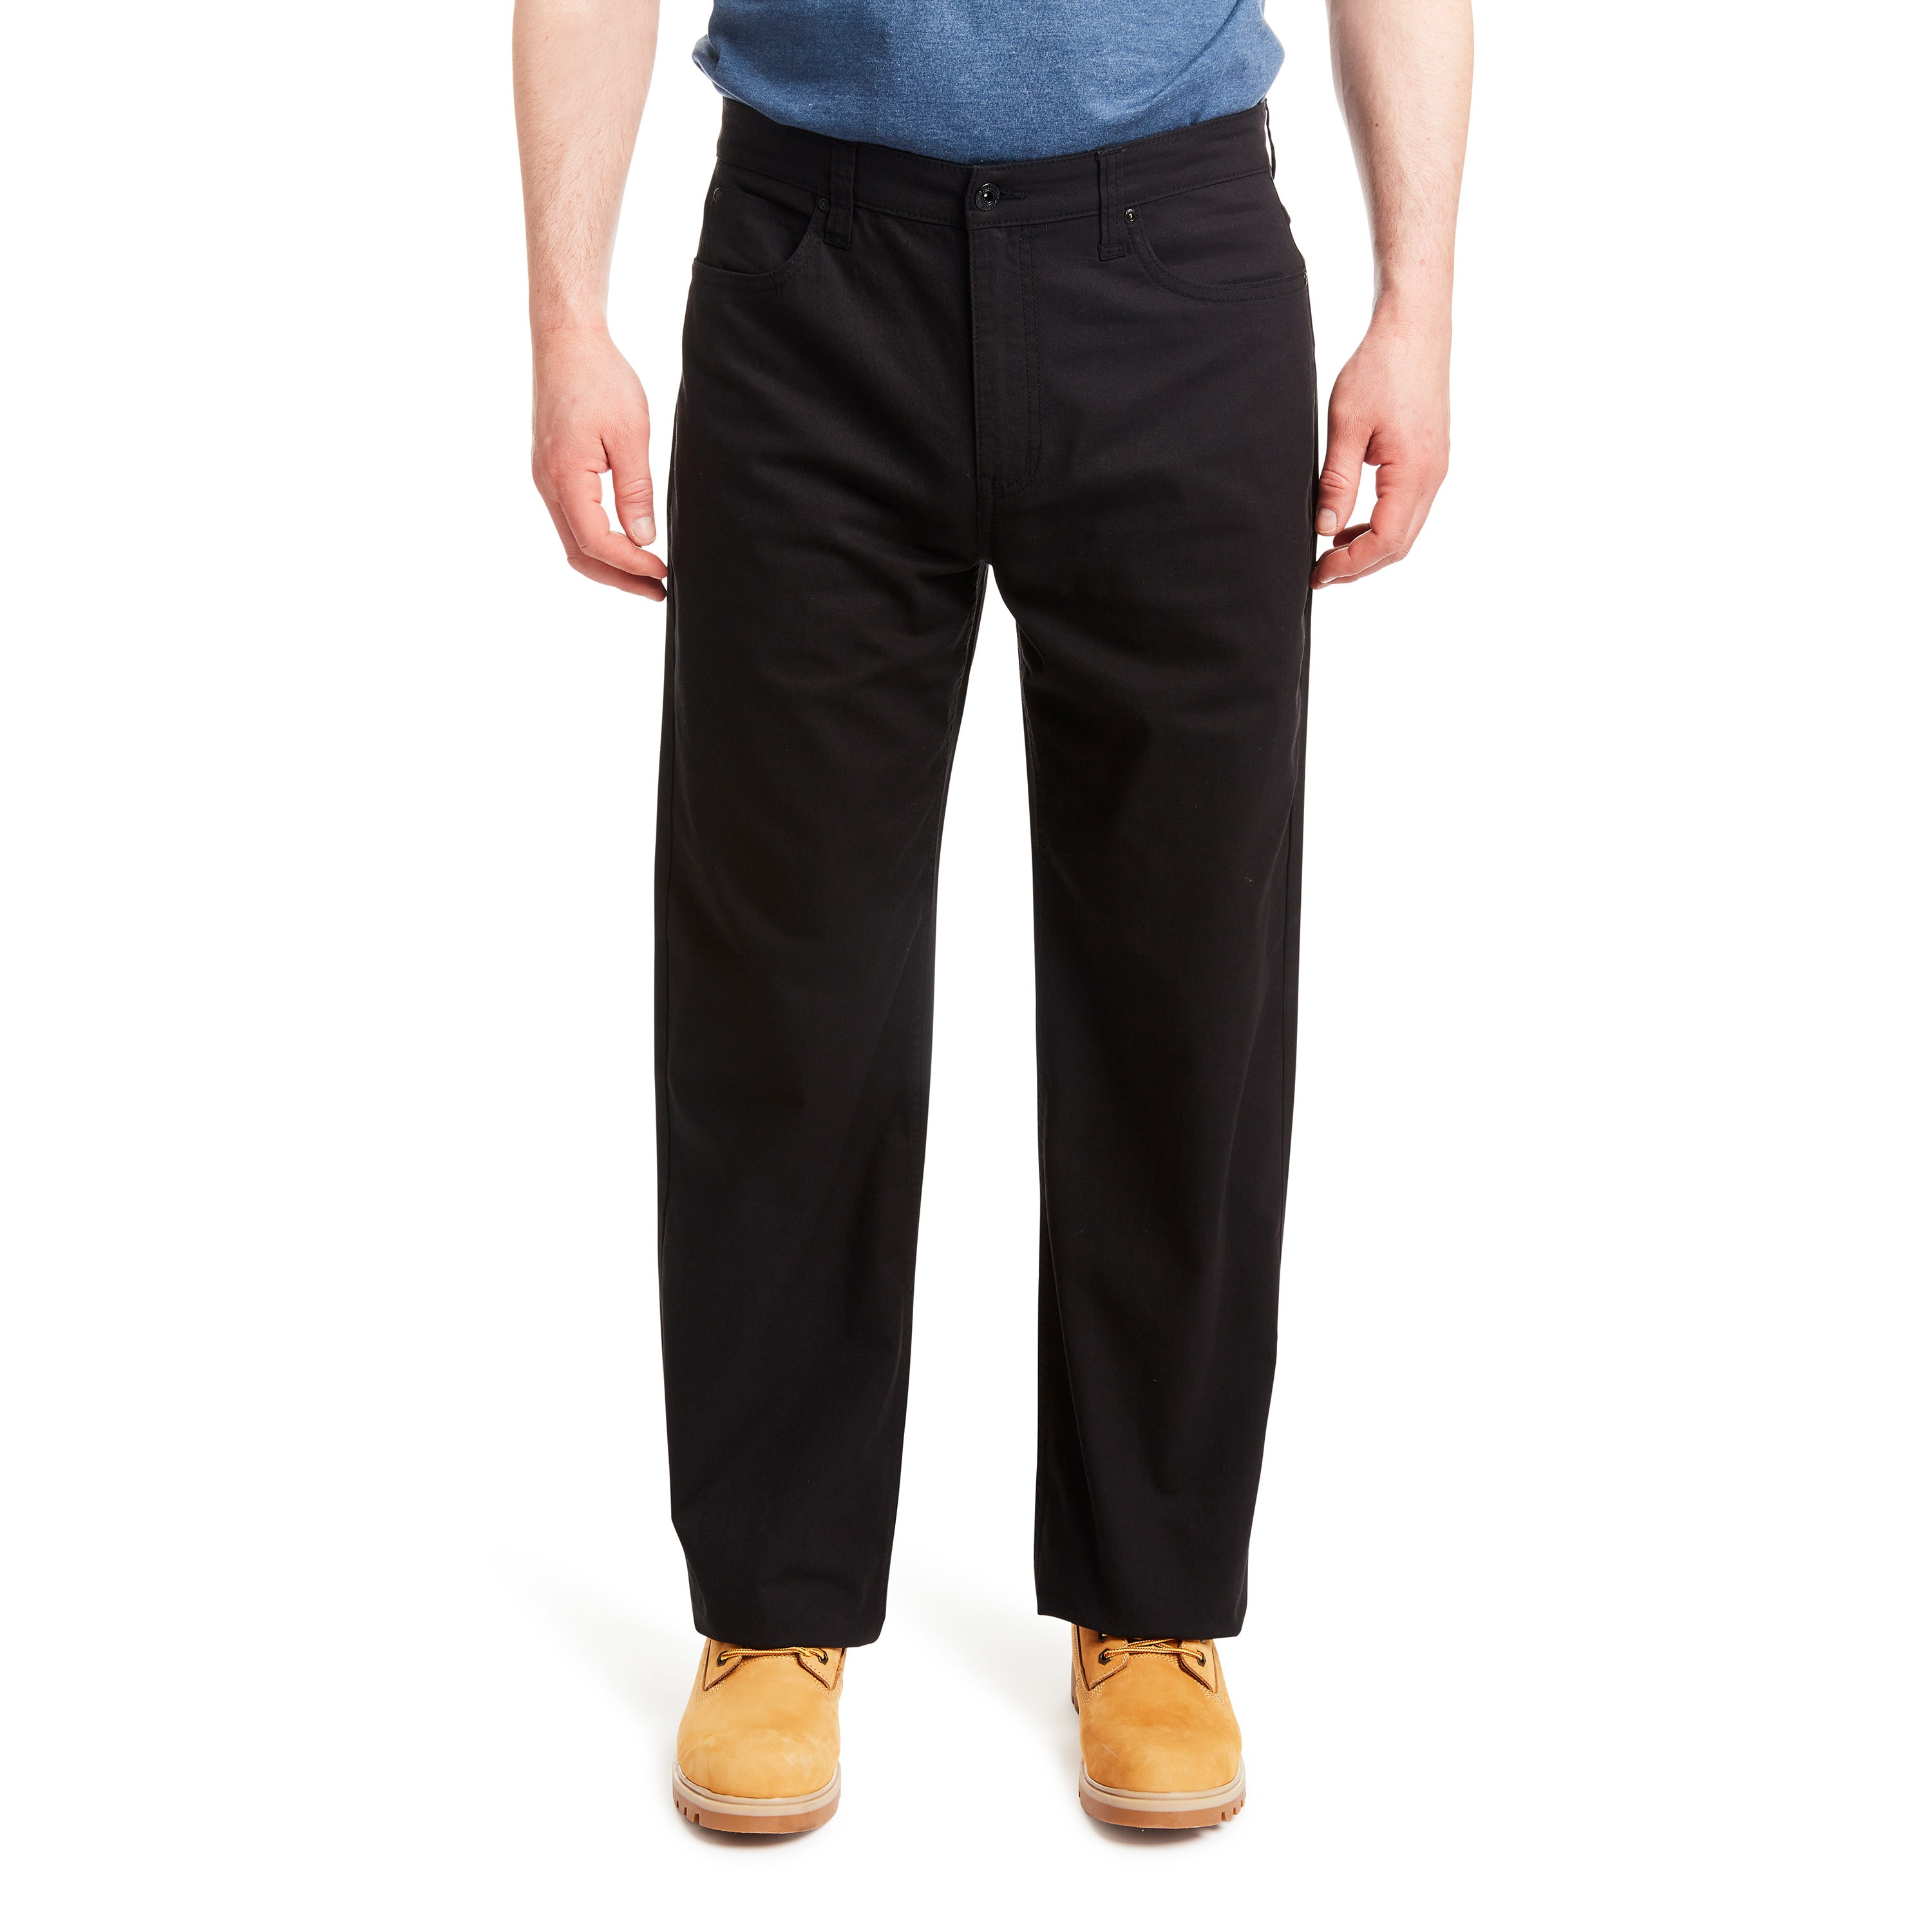 Smith's Workwear Men's Black Canvas Work Pants (32 X 32) in the